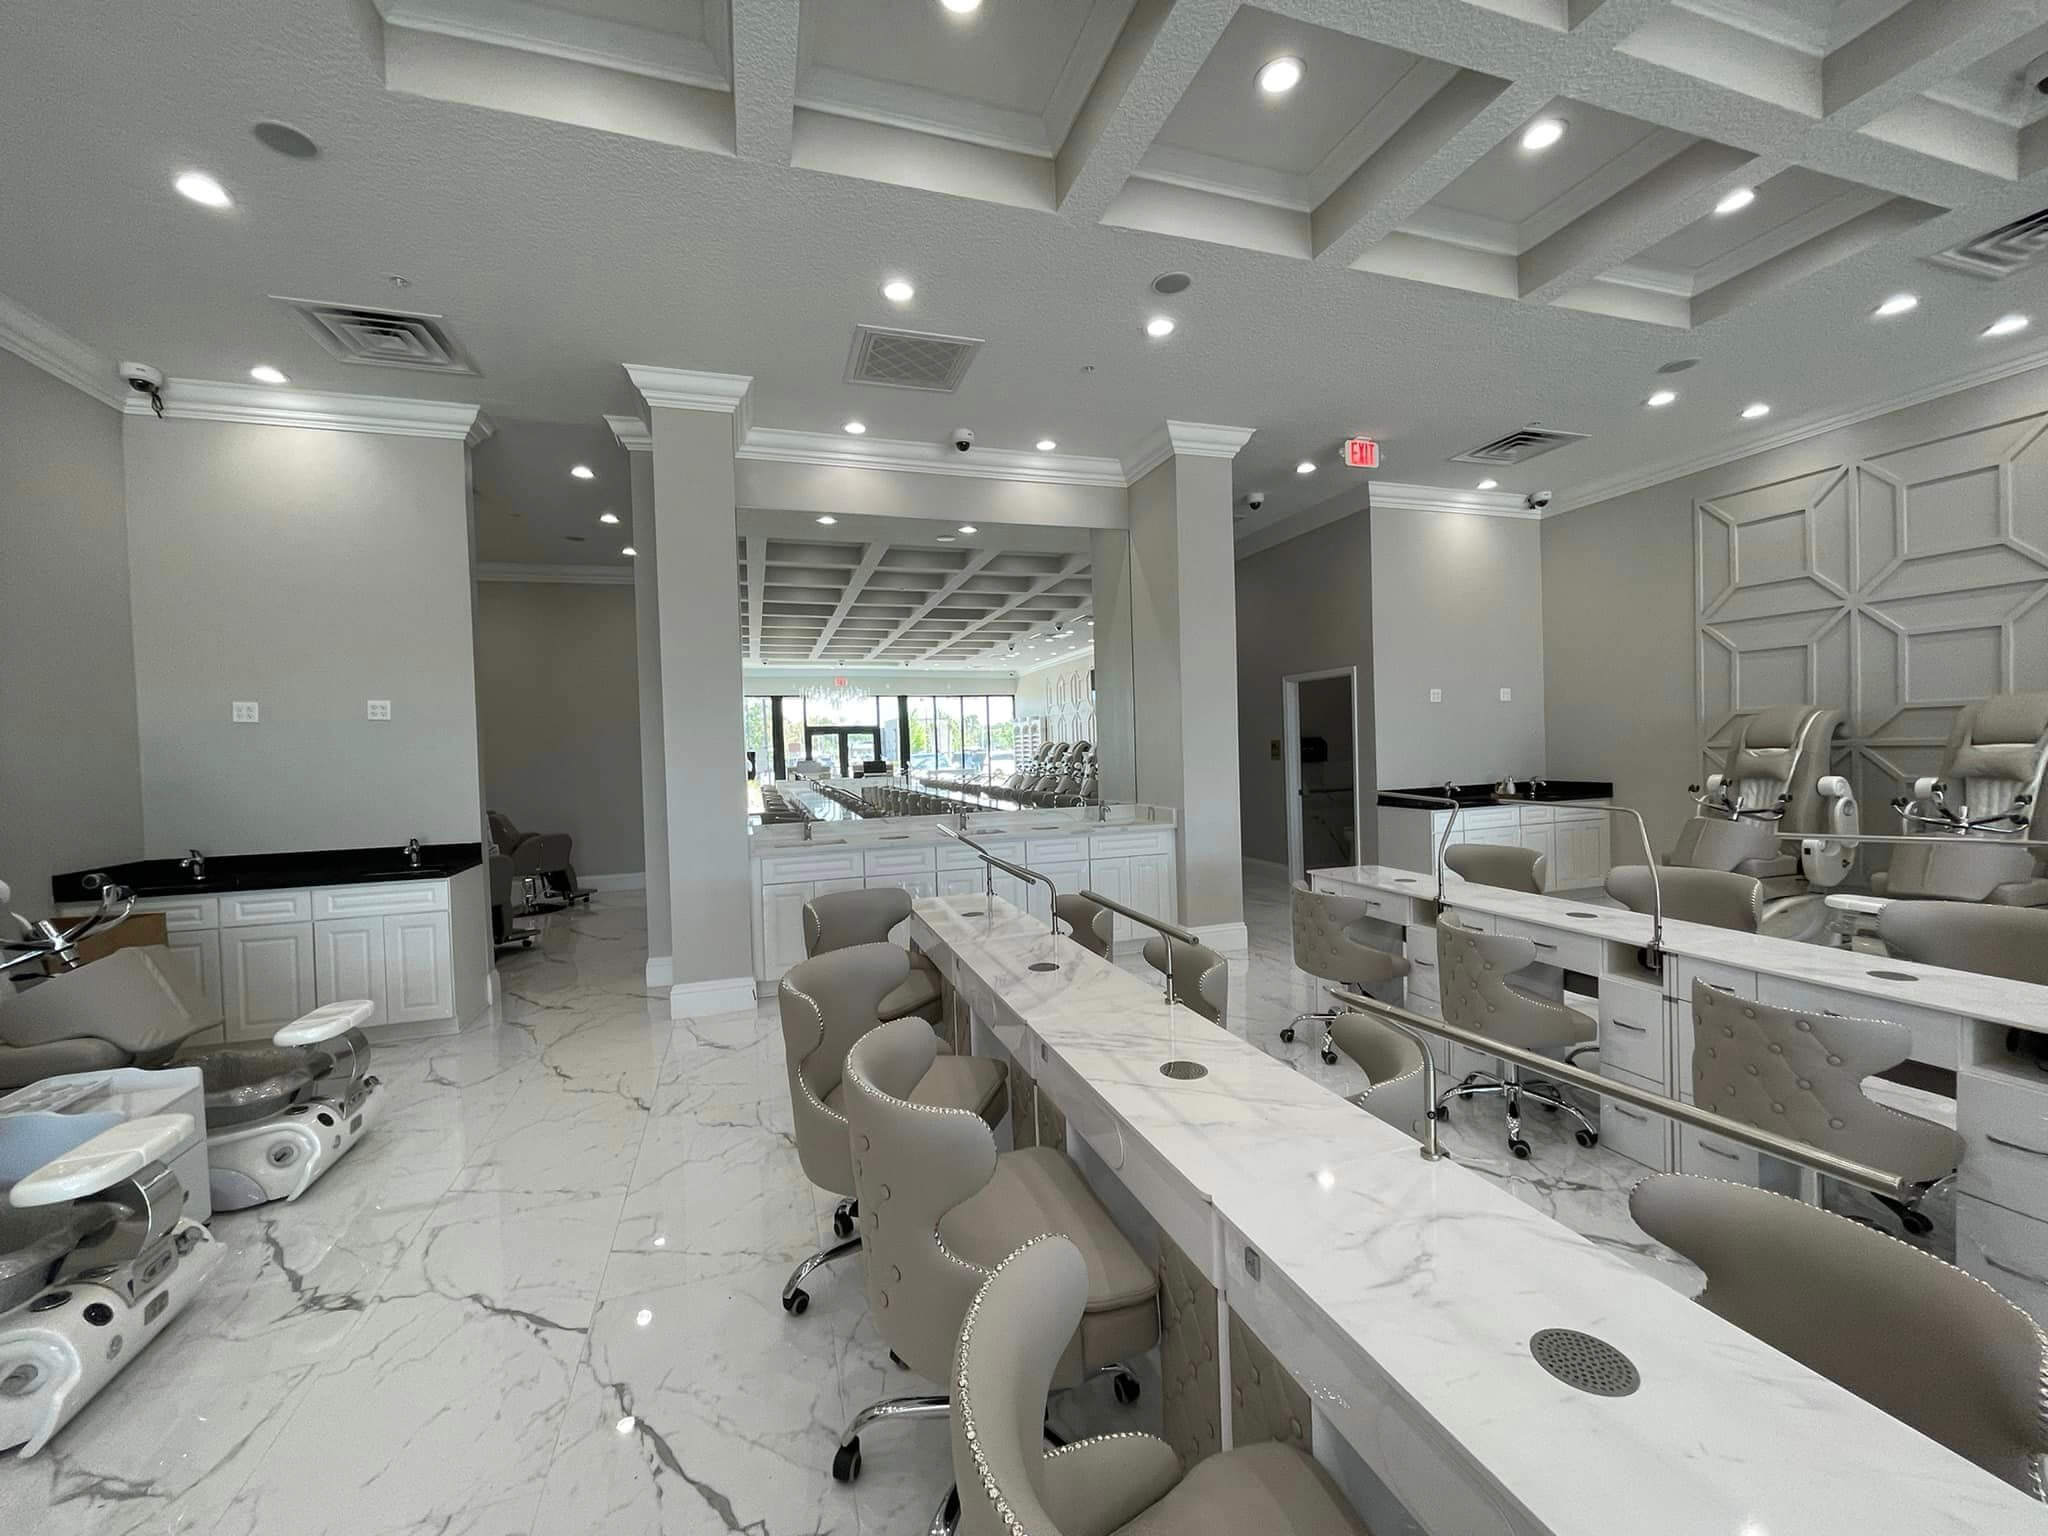 6 Instagram-Worthy Nail Salons in L.A